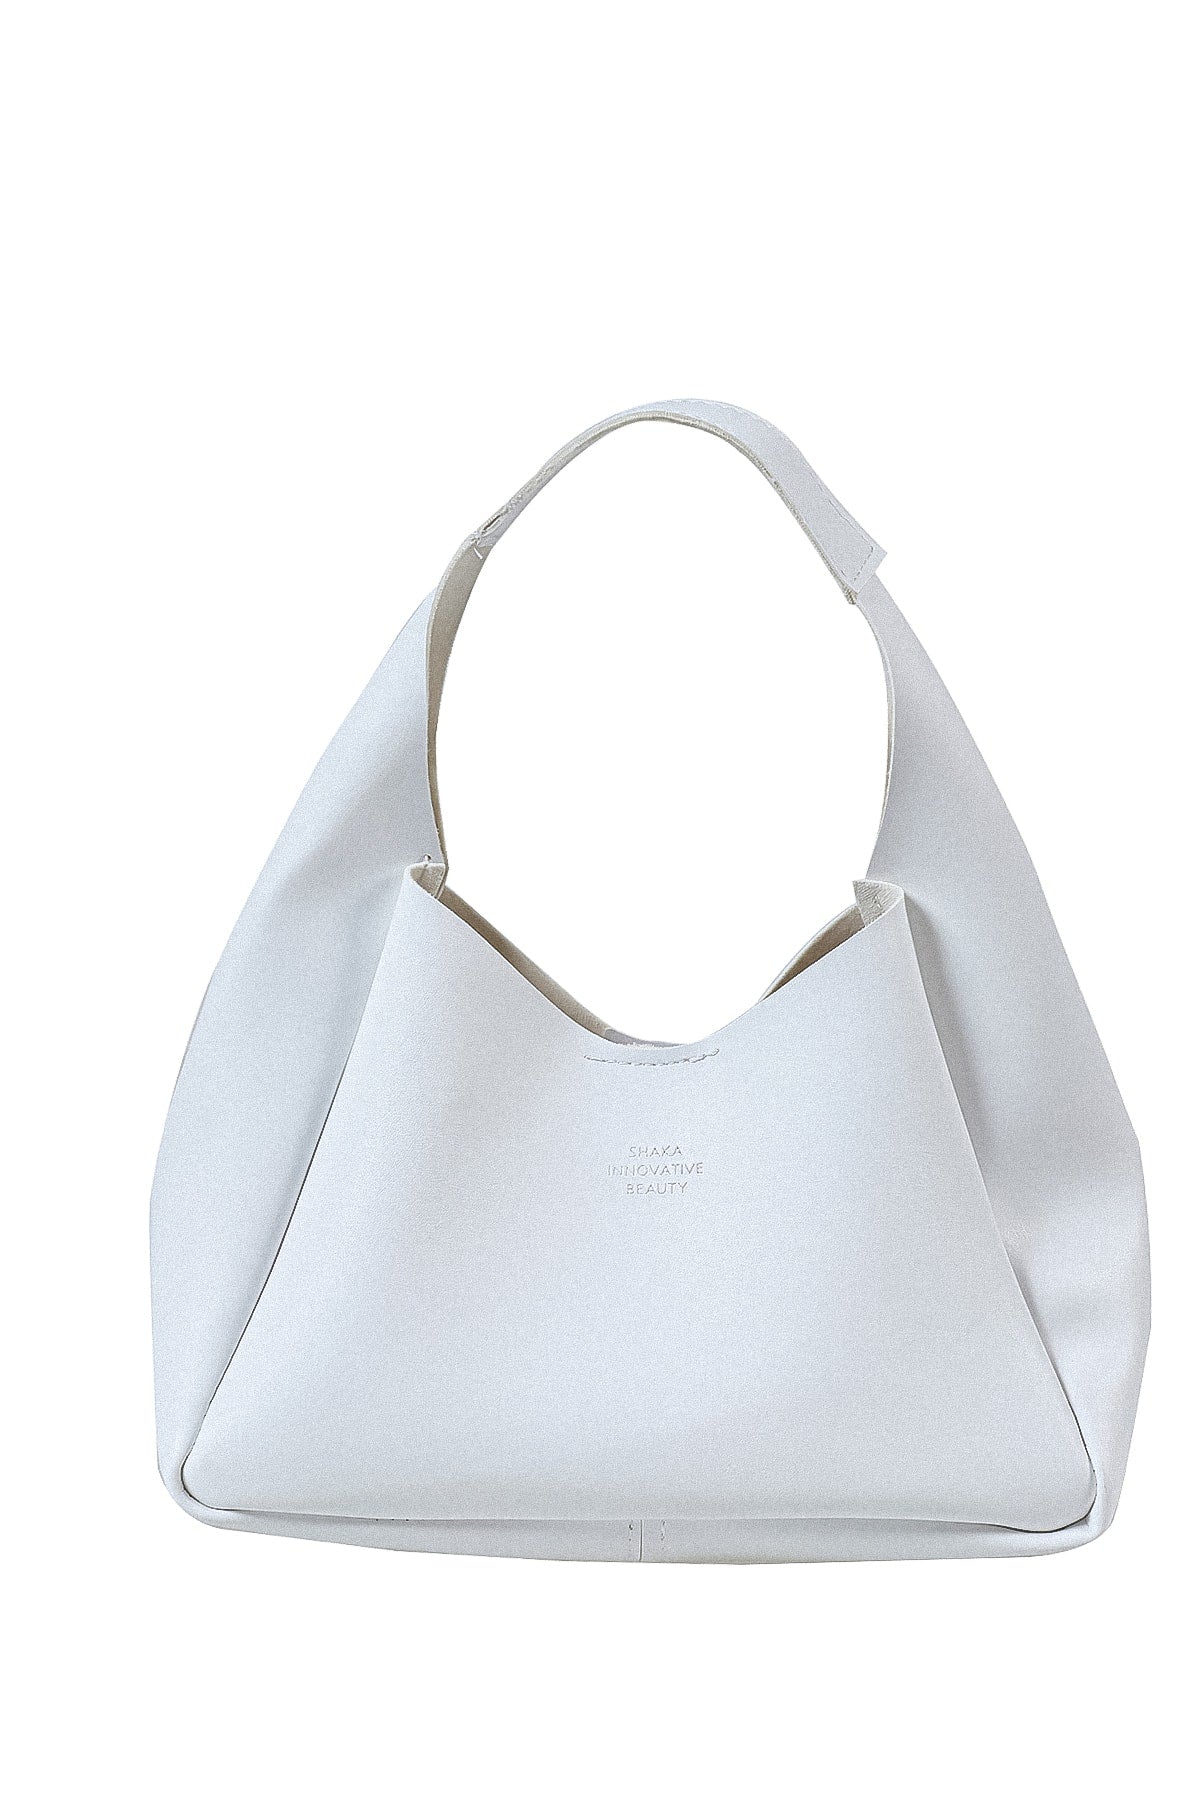 White Shk19 Zippered Imitation Leather Women's Hand And Shoulder Bag With Wallet E:33 L:15 W:10 Cm